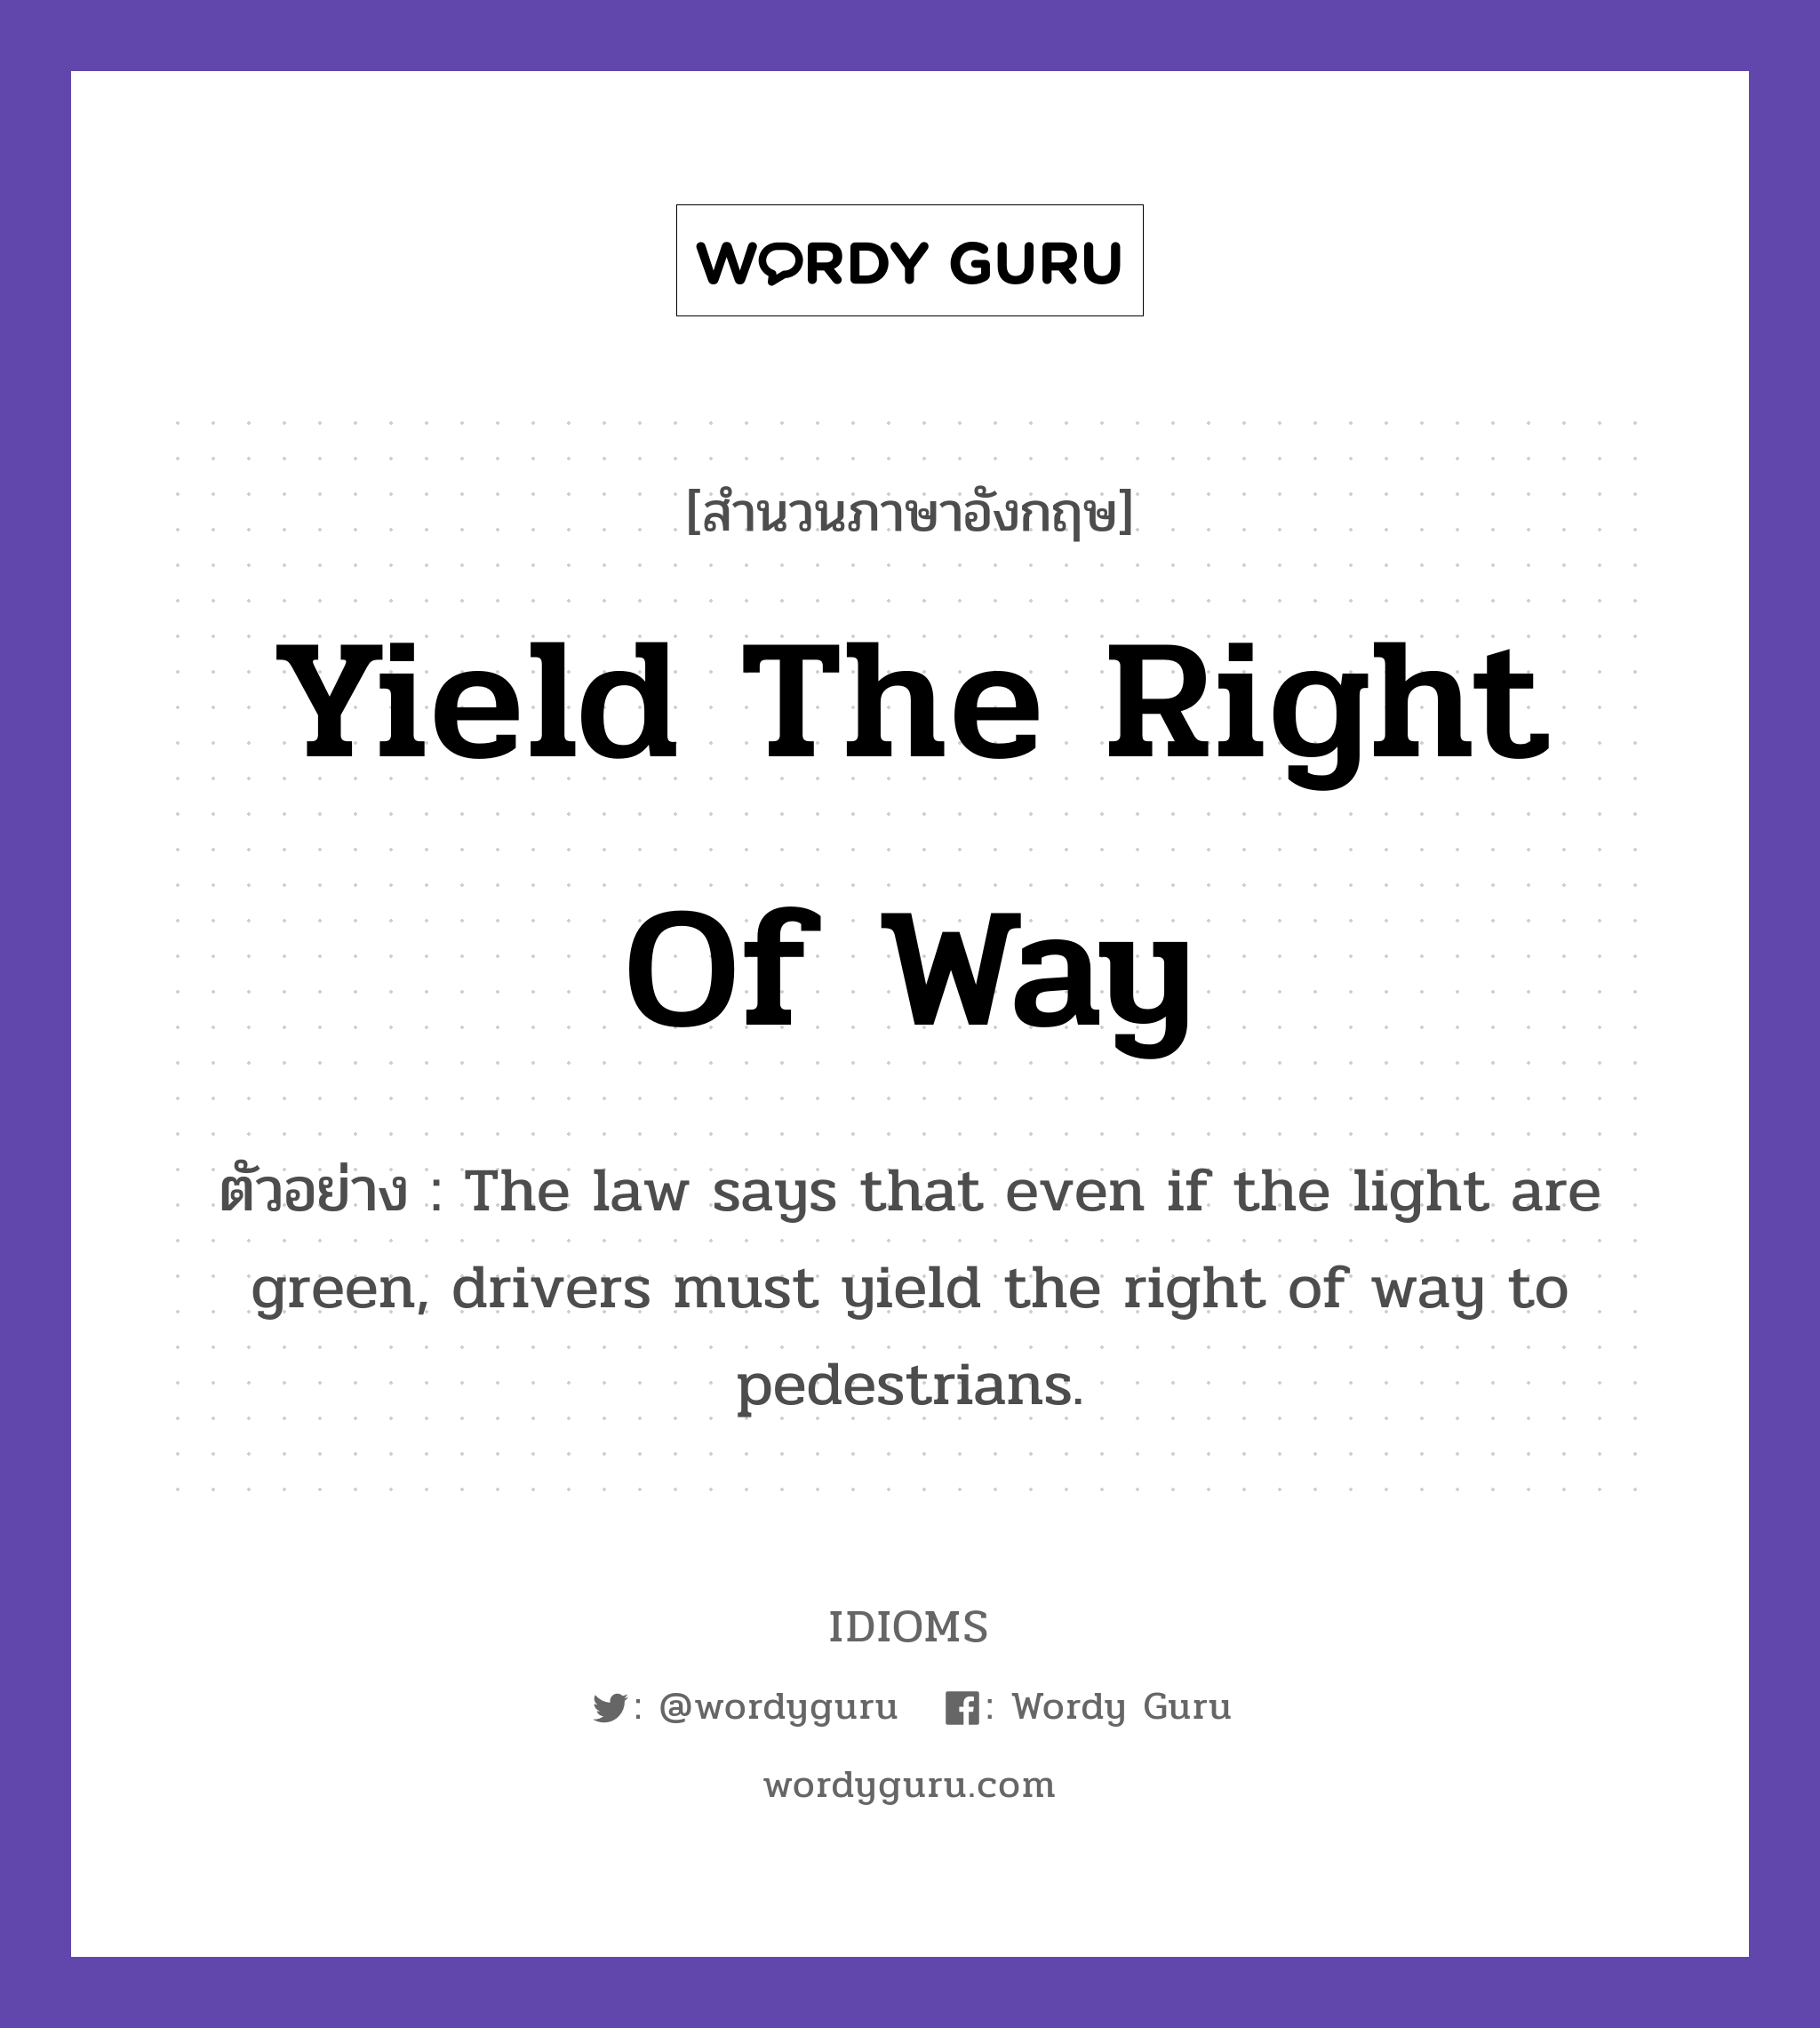 Yield The Right Of Way แปลว่า?, สำนวนภาษาอังกฤษ Yield The Right Of Way ตัวอย่าง The law says that even if the light are green, drivers must yield the right of way to pedestrians.